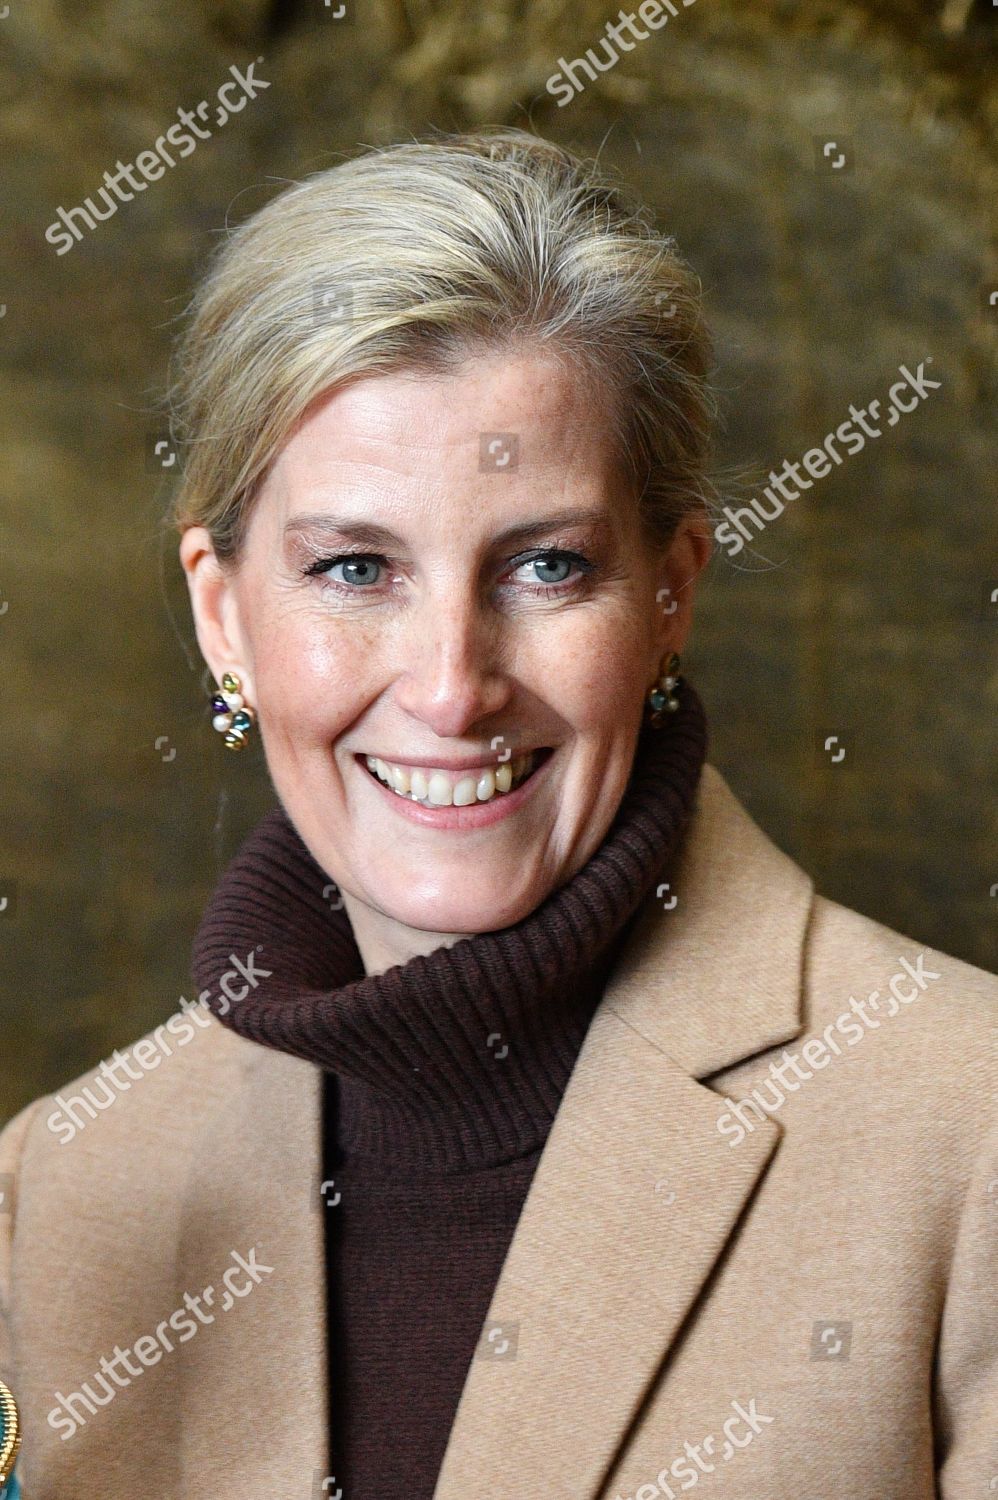 sophie-countess-of-wessex-visit-to-cumbria-shutterstock-editorial-10095439cs.jpg